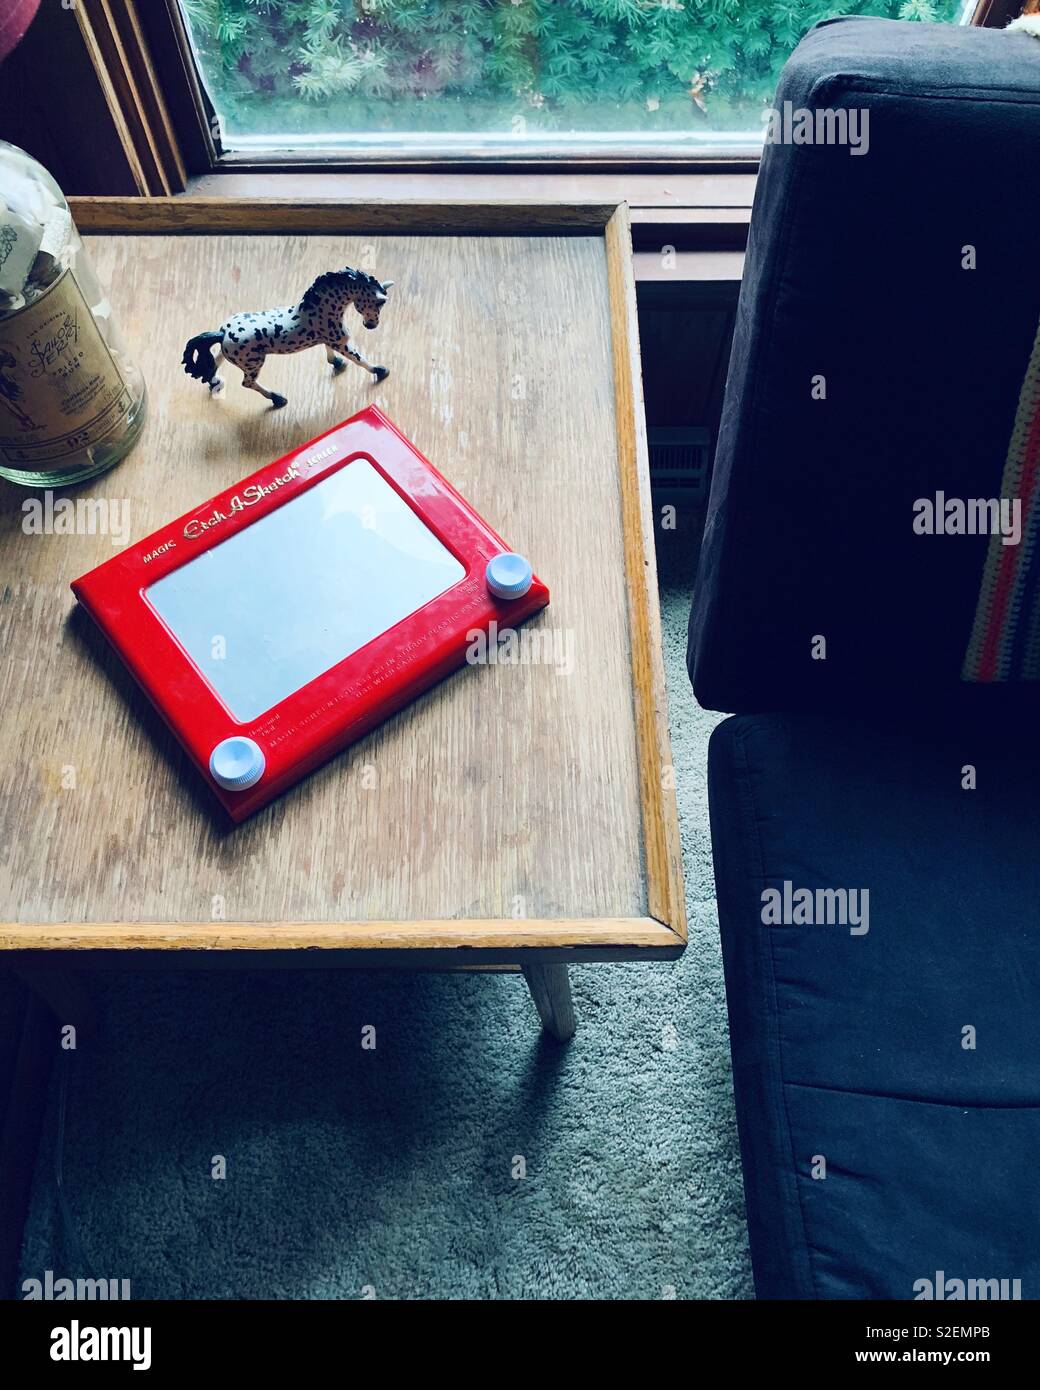 EtchASketch toy on a table inside a home by the window Stock Photo